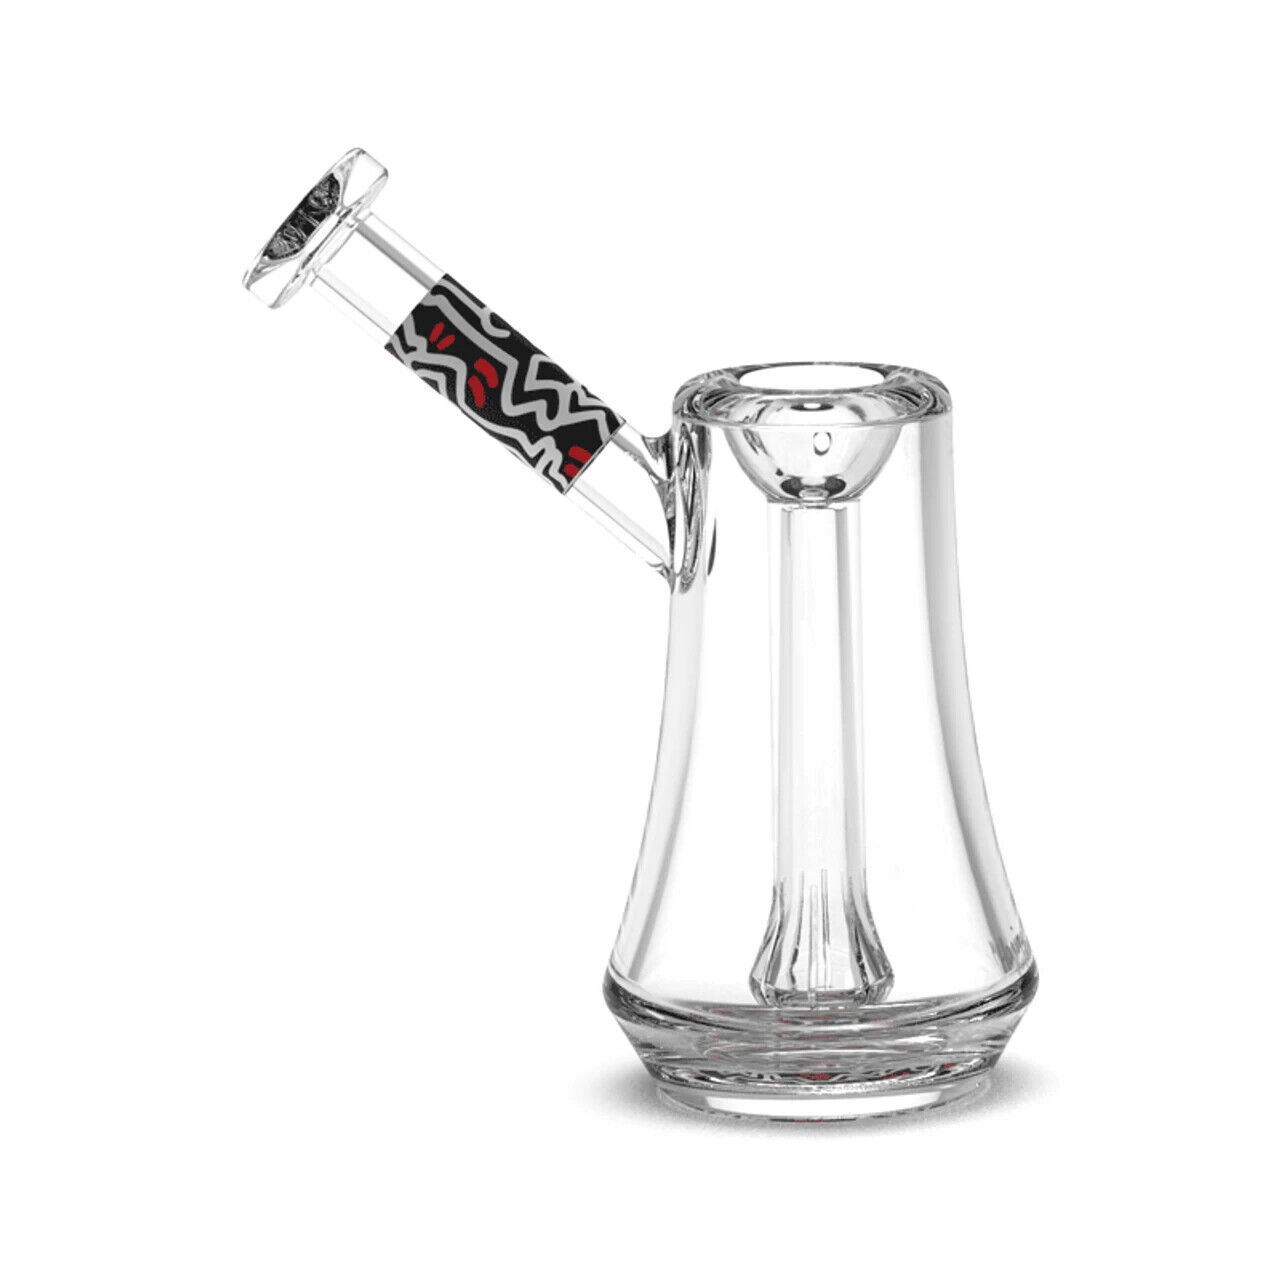 K.Haring Bubbler Black, Red and White